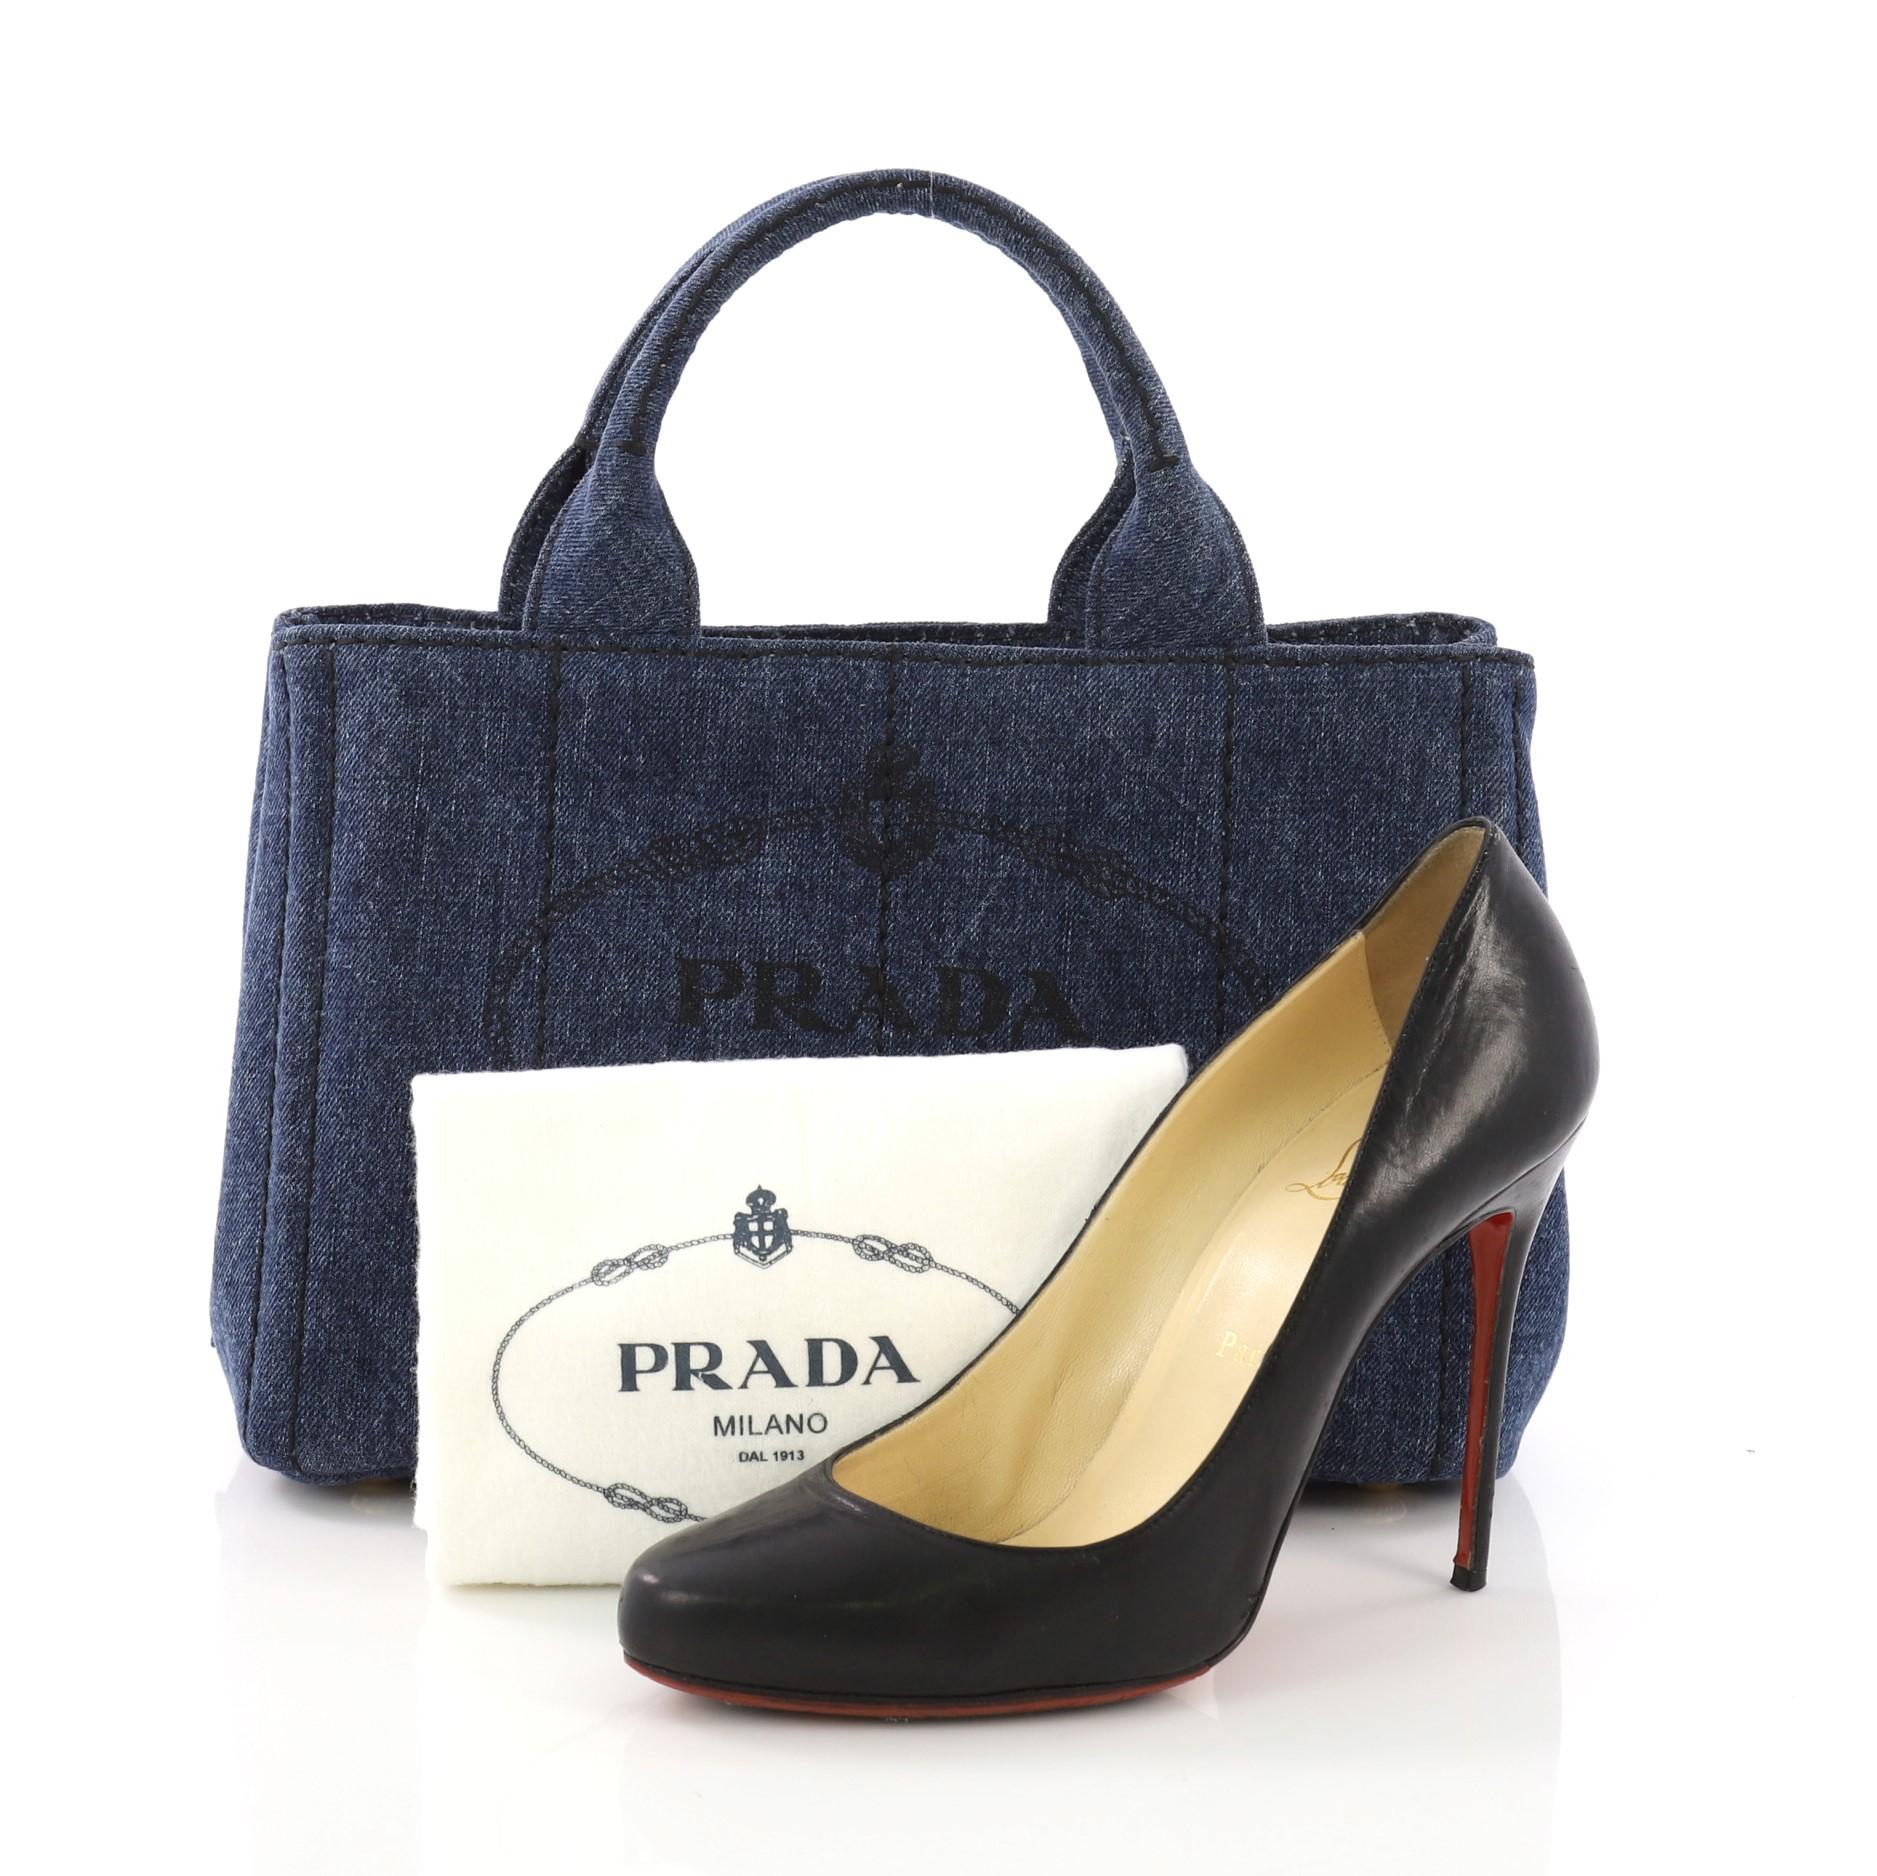 This Prada Canapa Convertible Tote Denim Mini, crafted from blue denim, features dual handles, side snap buttons, protective base studs, and gold-tone hardware. Its wide top opening showcases a blue denim interior with zip and slip pockets. **Note: